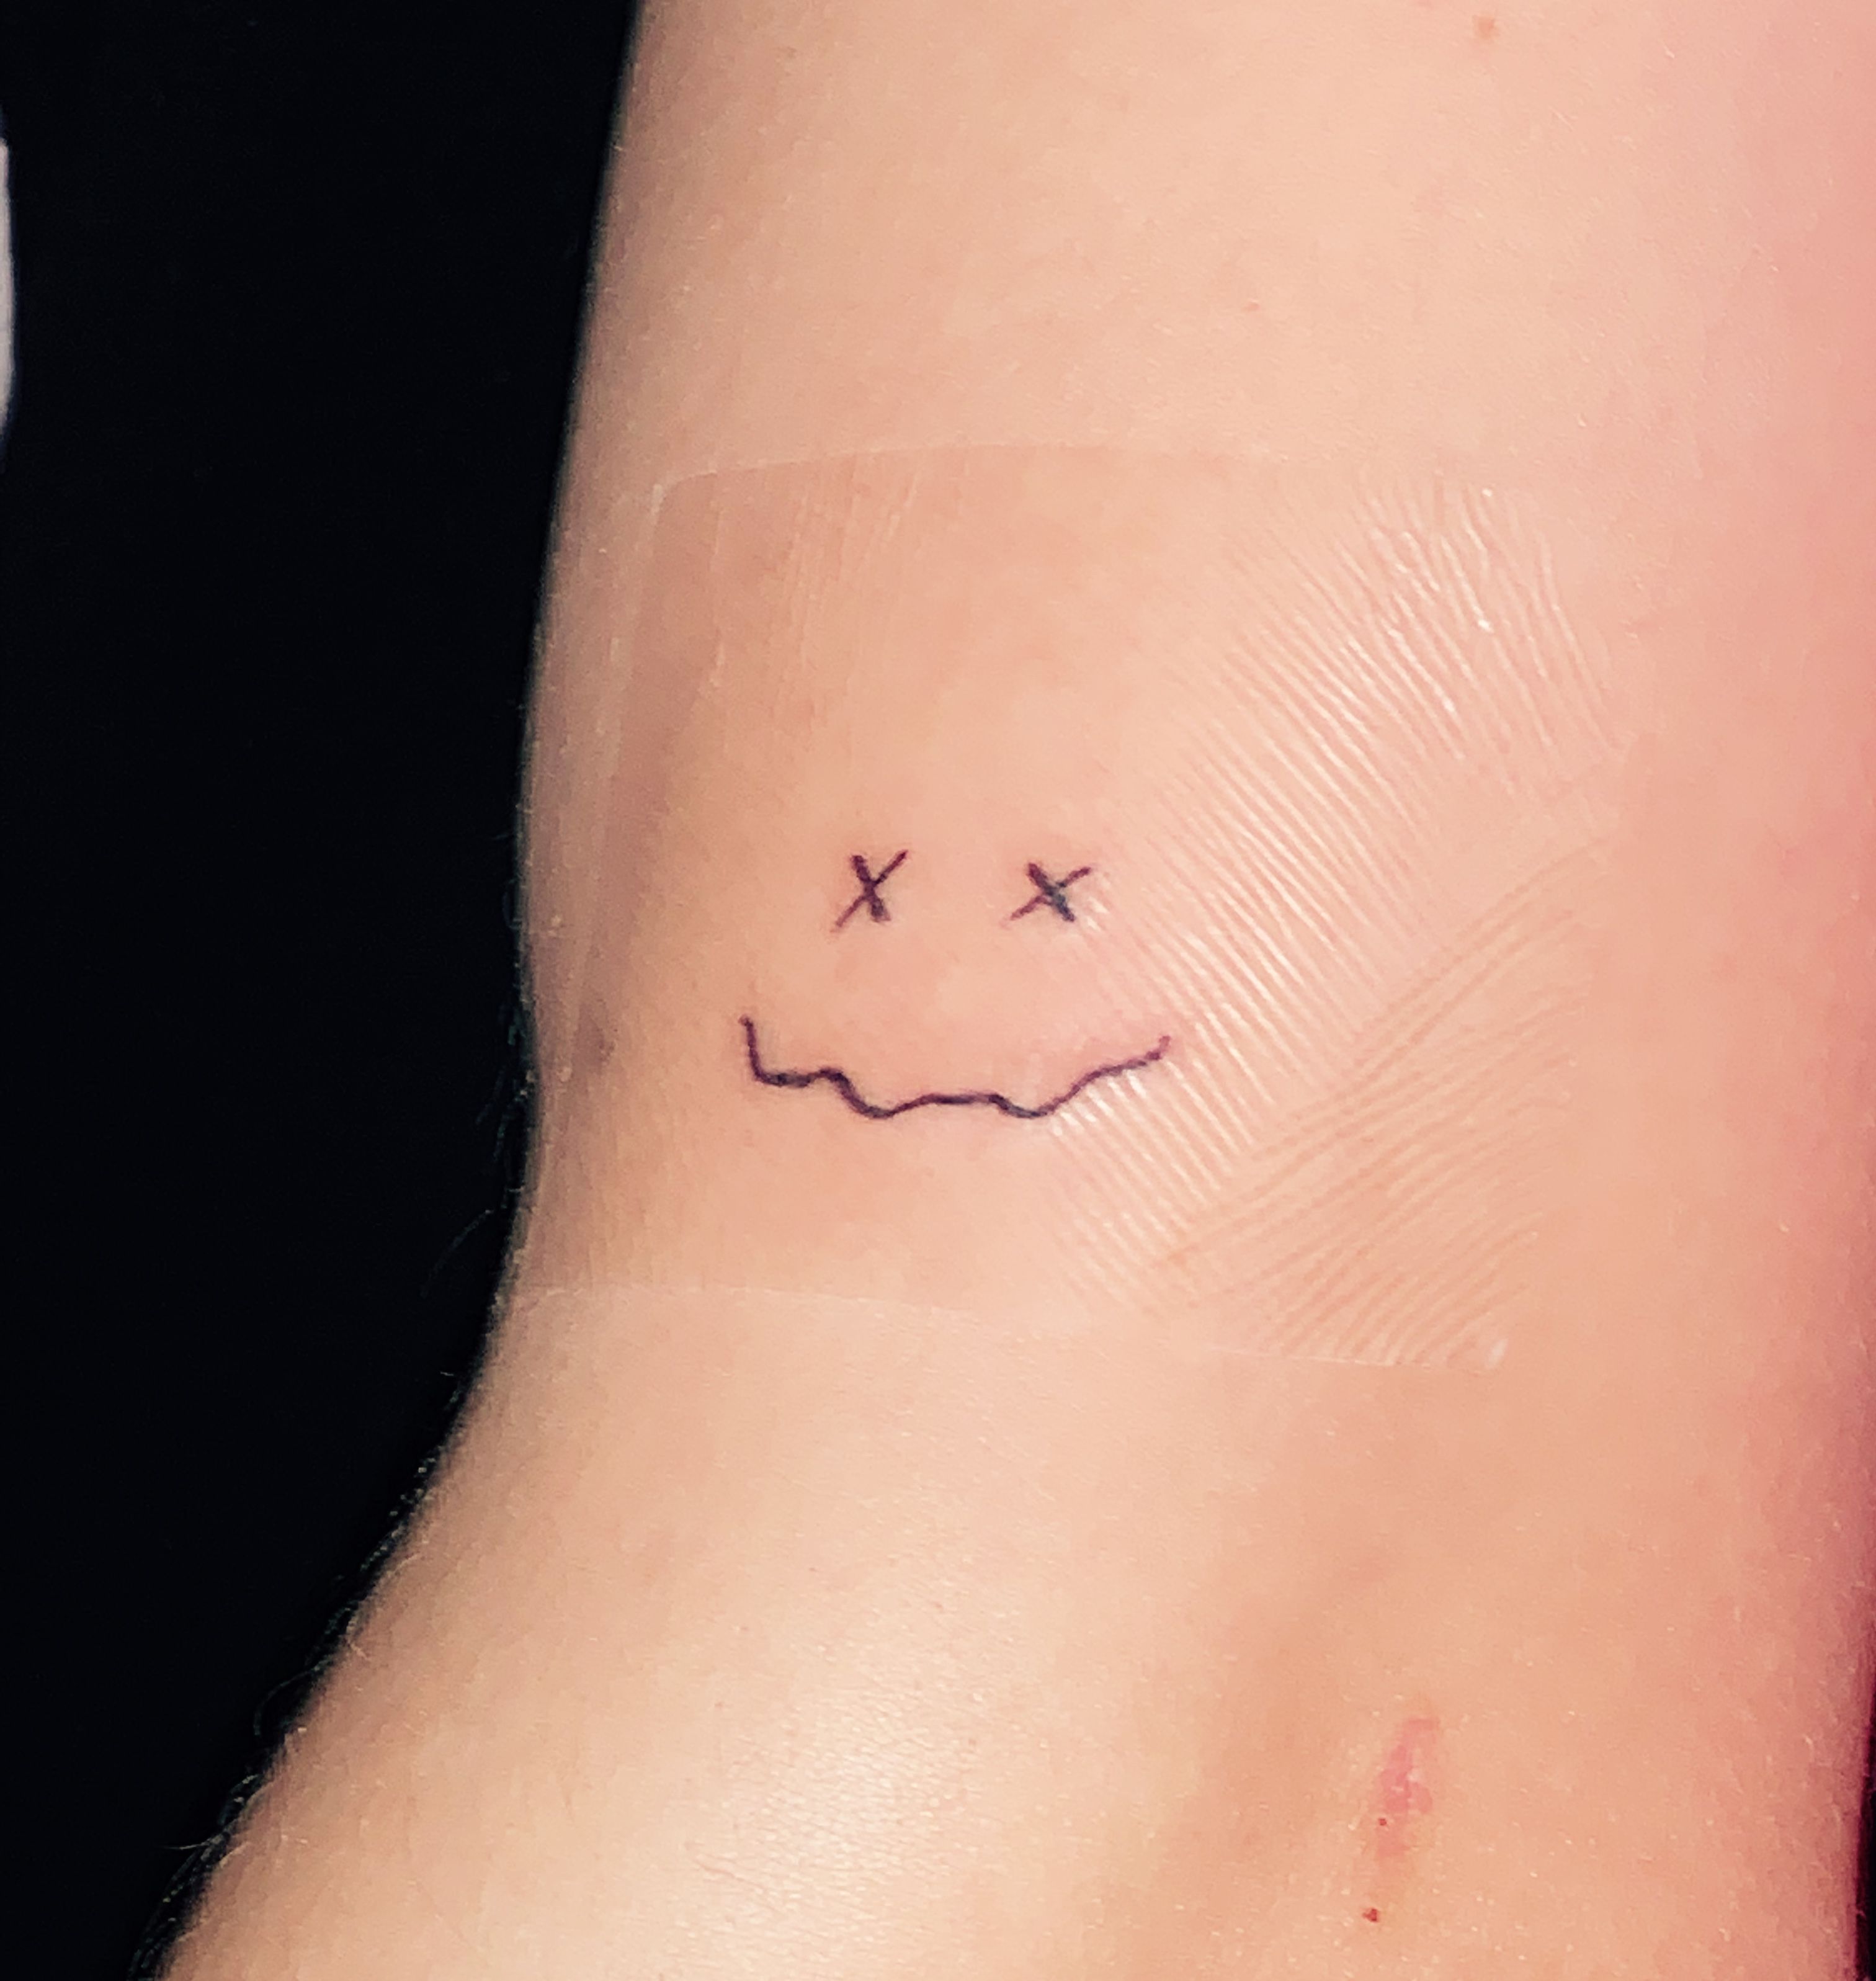 Smiley face tattooed on the inner arm